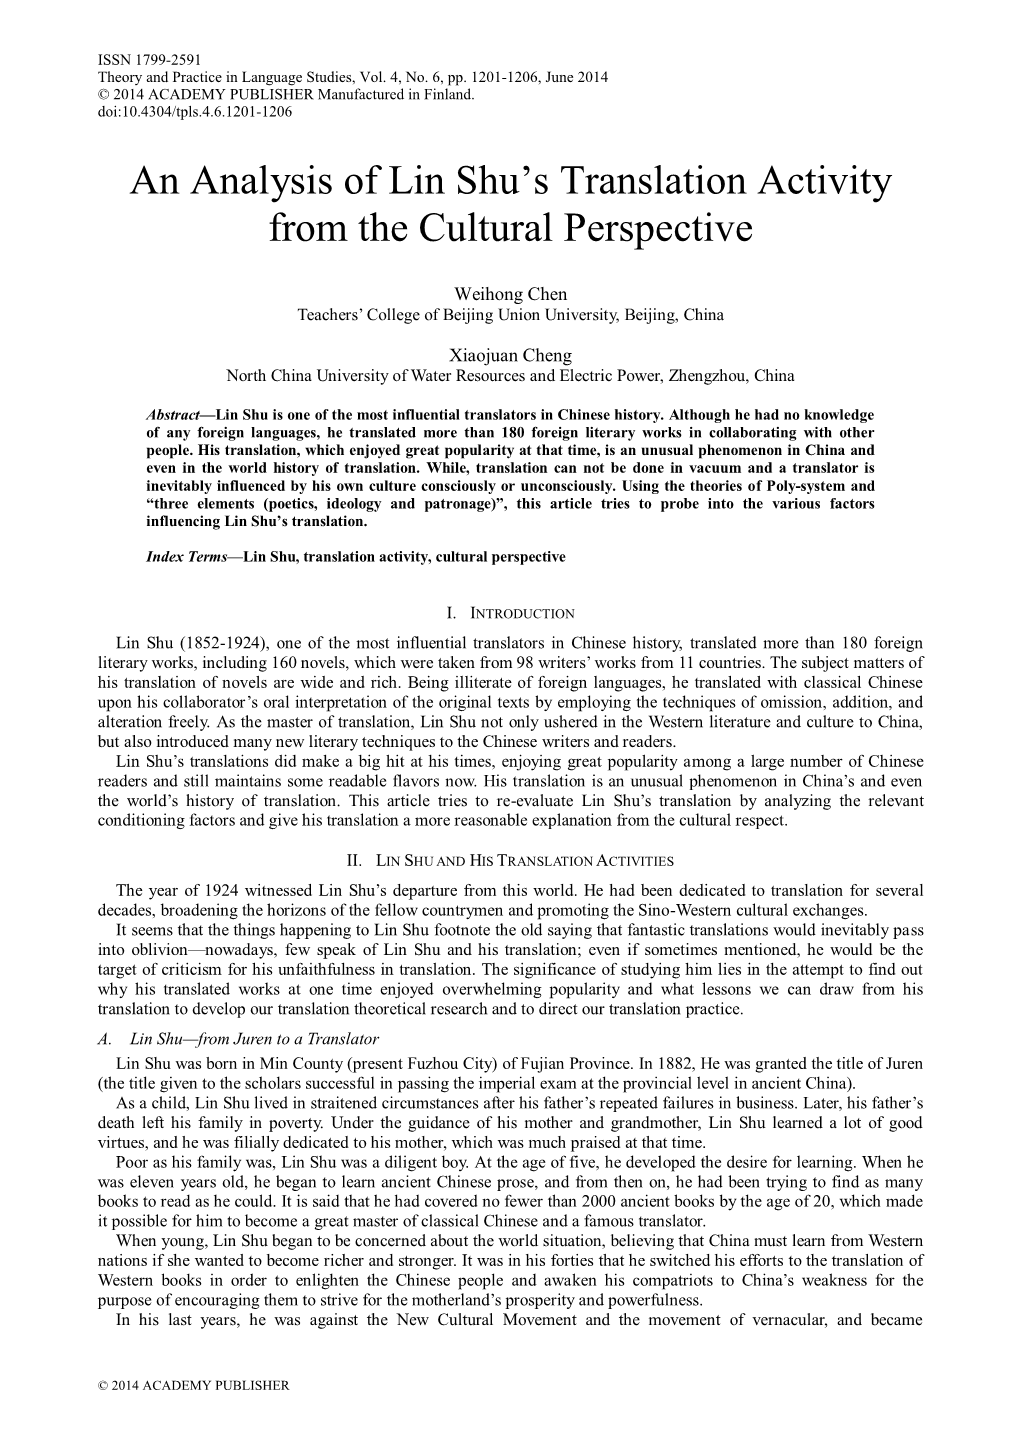 An Analysis of Lin Shu's Translation Activity from the Cultural Perspective